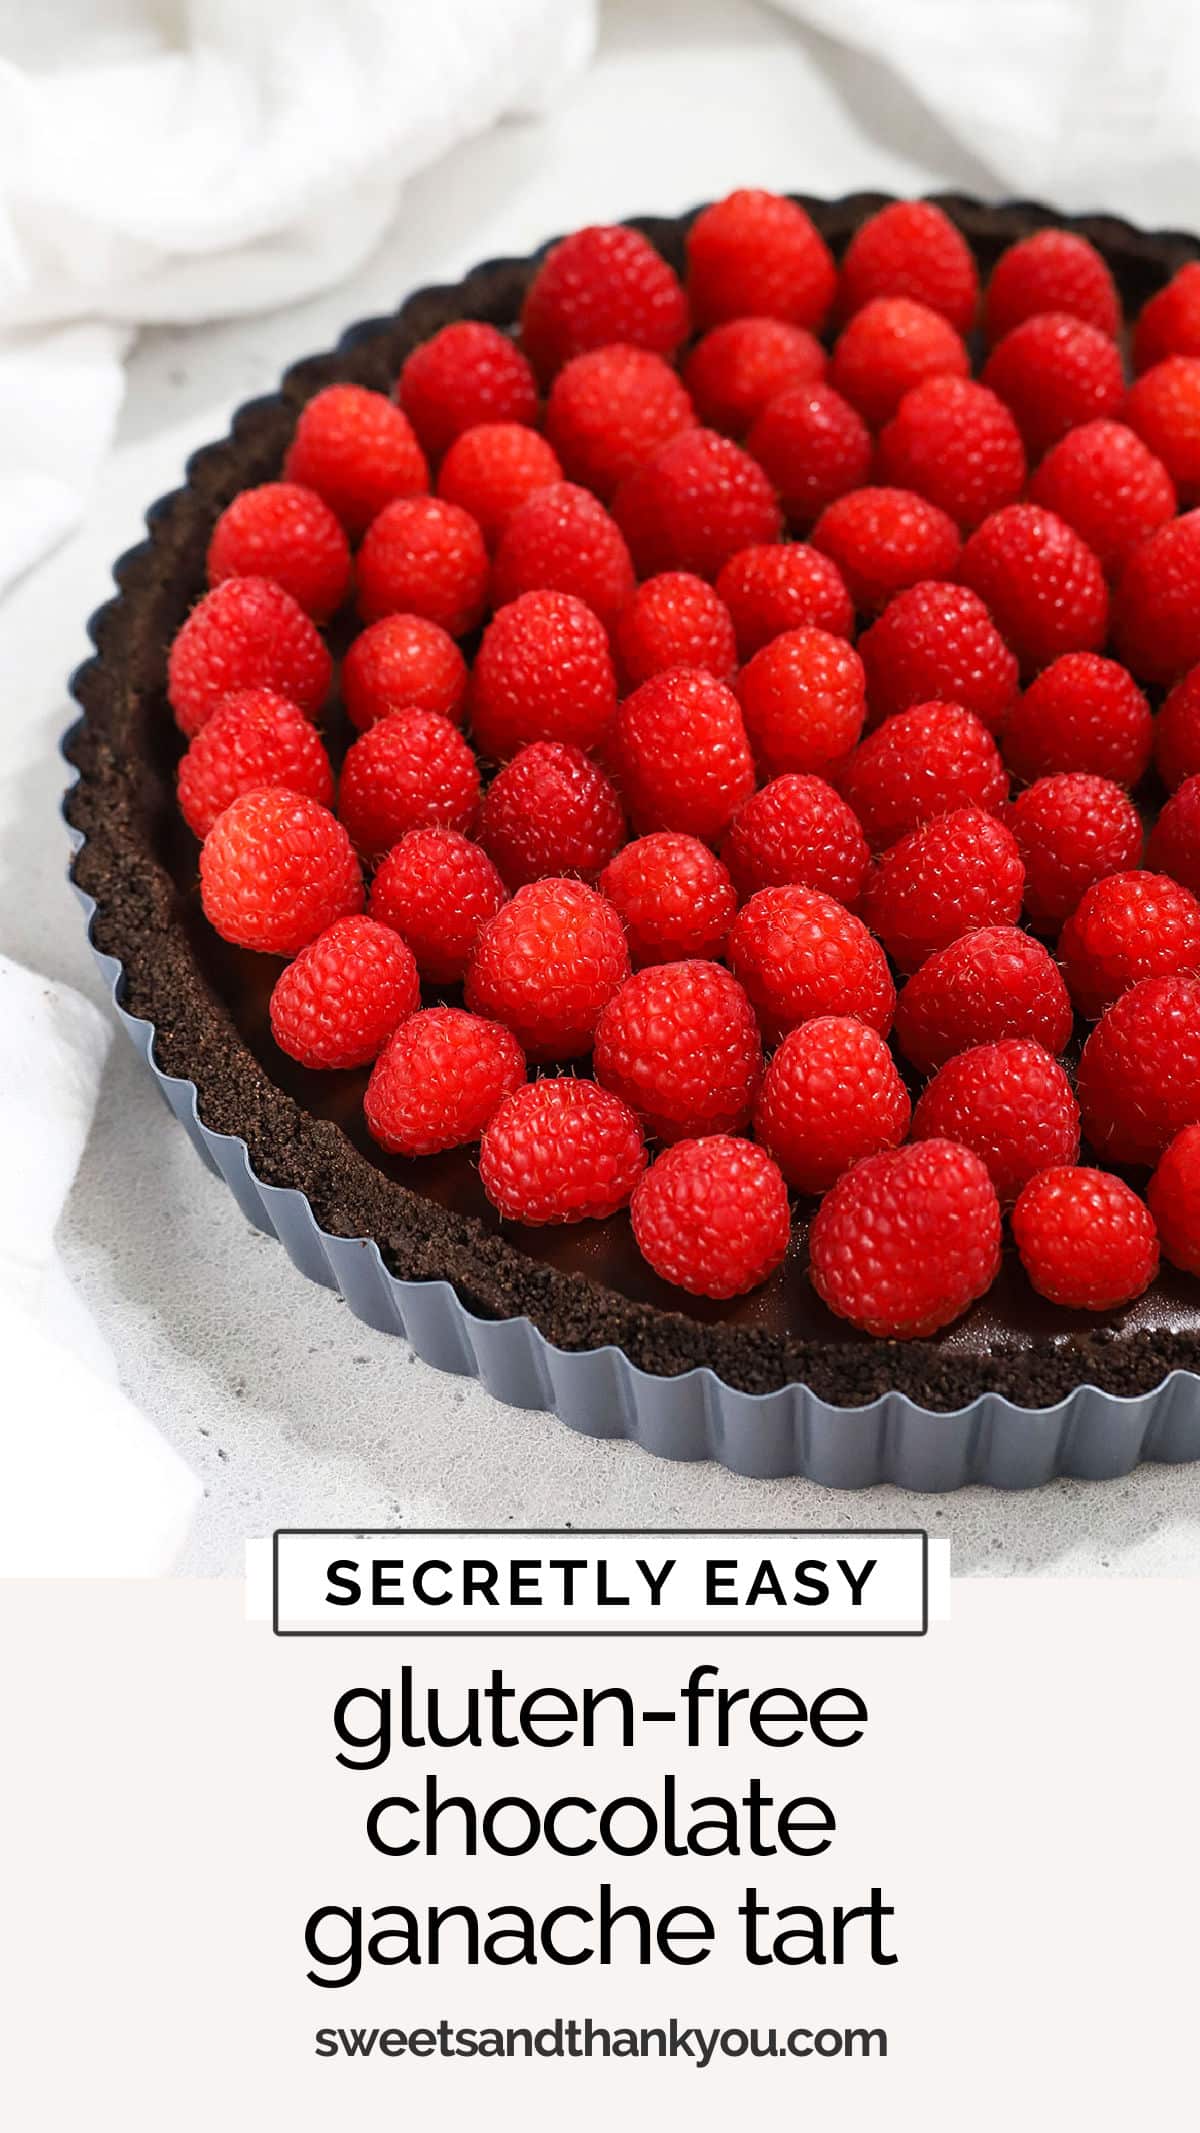 Made with a simple chocolate crust and luscious ganache filling, this easy gluten-free chocolate tart is perfect for a special occasion! We love to make it as a gluten-free chocolate raspberry tart with fresh raspberries, but you can try one of our other yummy toppings, if you prefer. No matter how you serve it, this gluten-free tart is sure to impress!